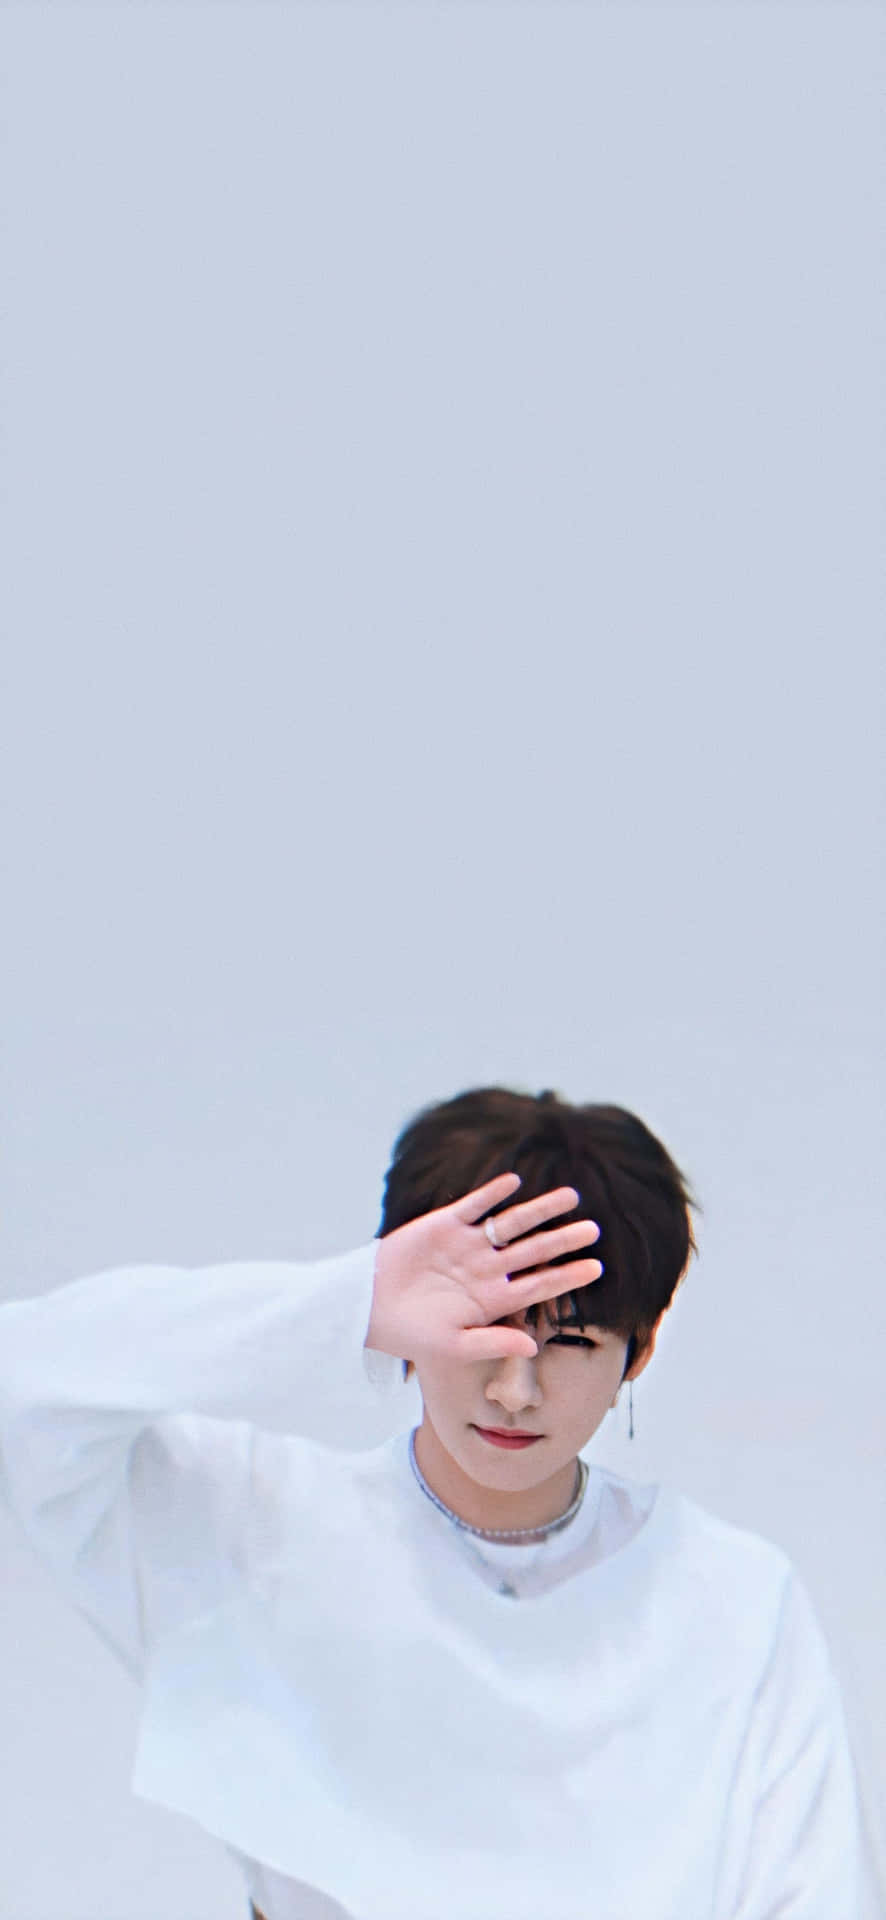 Lee Know Hand Covering Face Pose Wallpaper